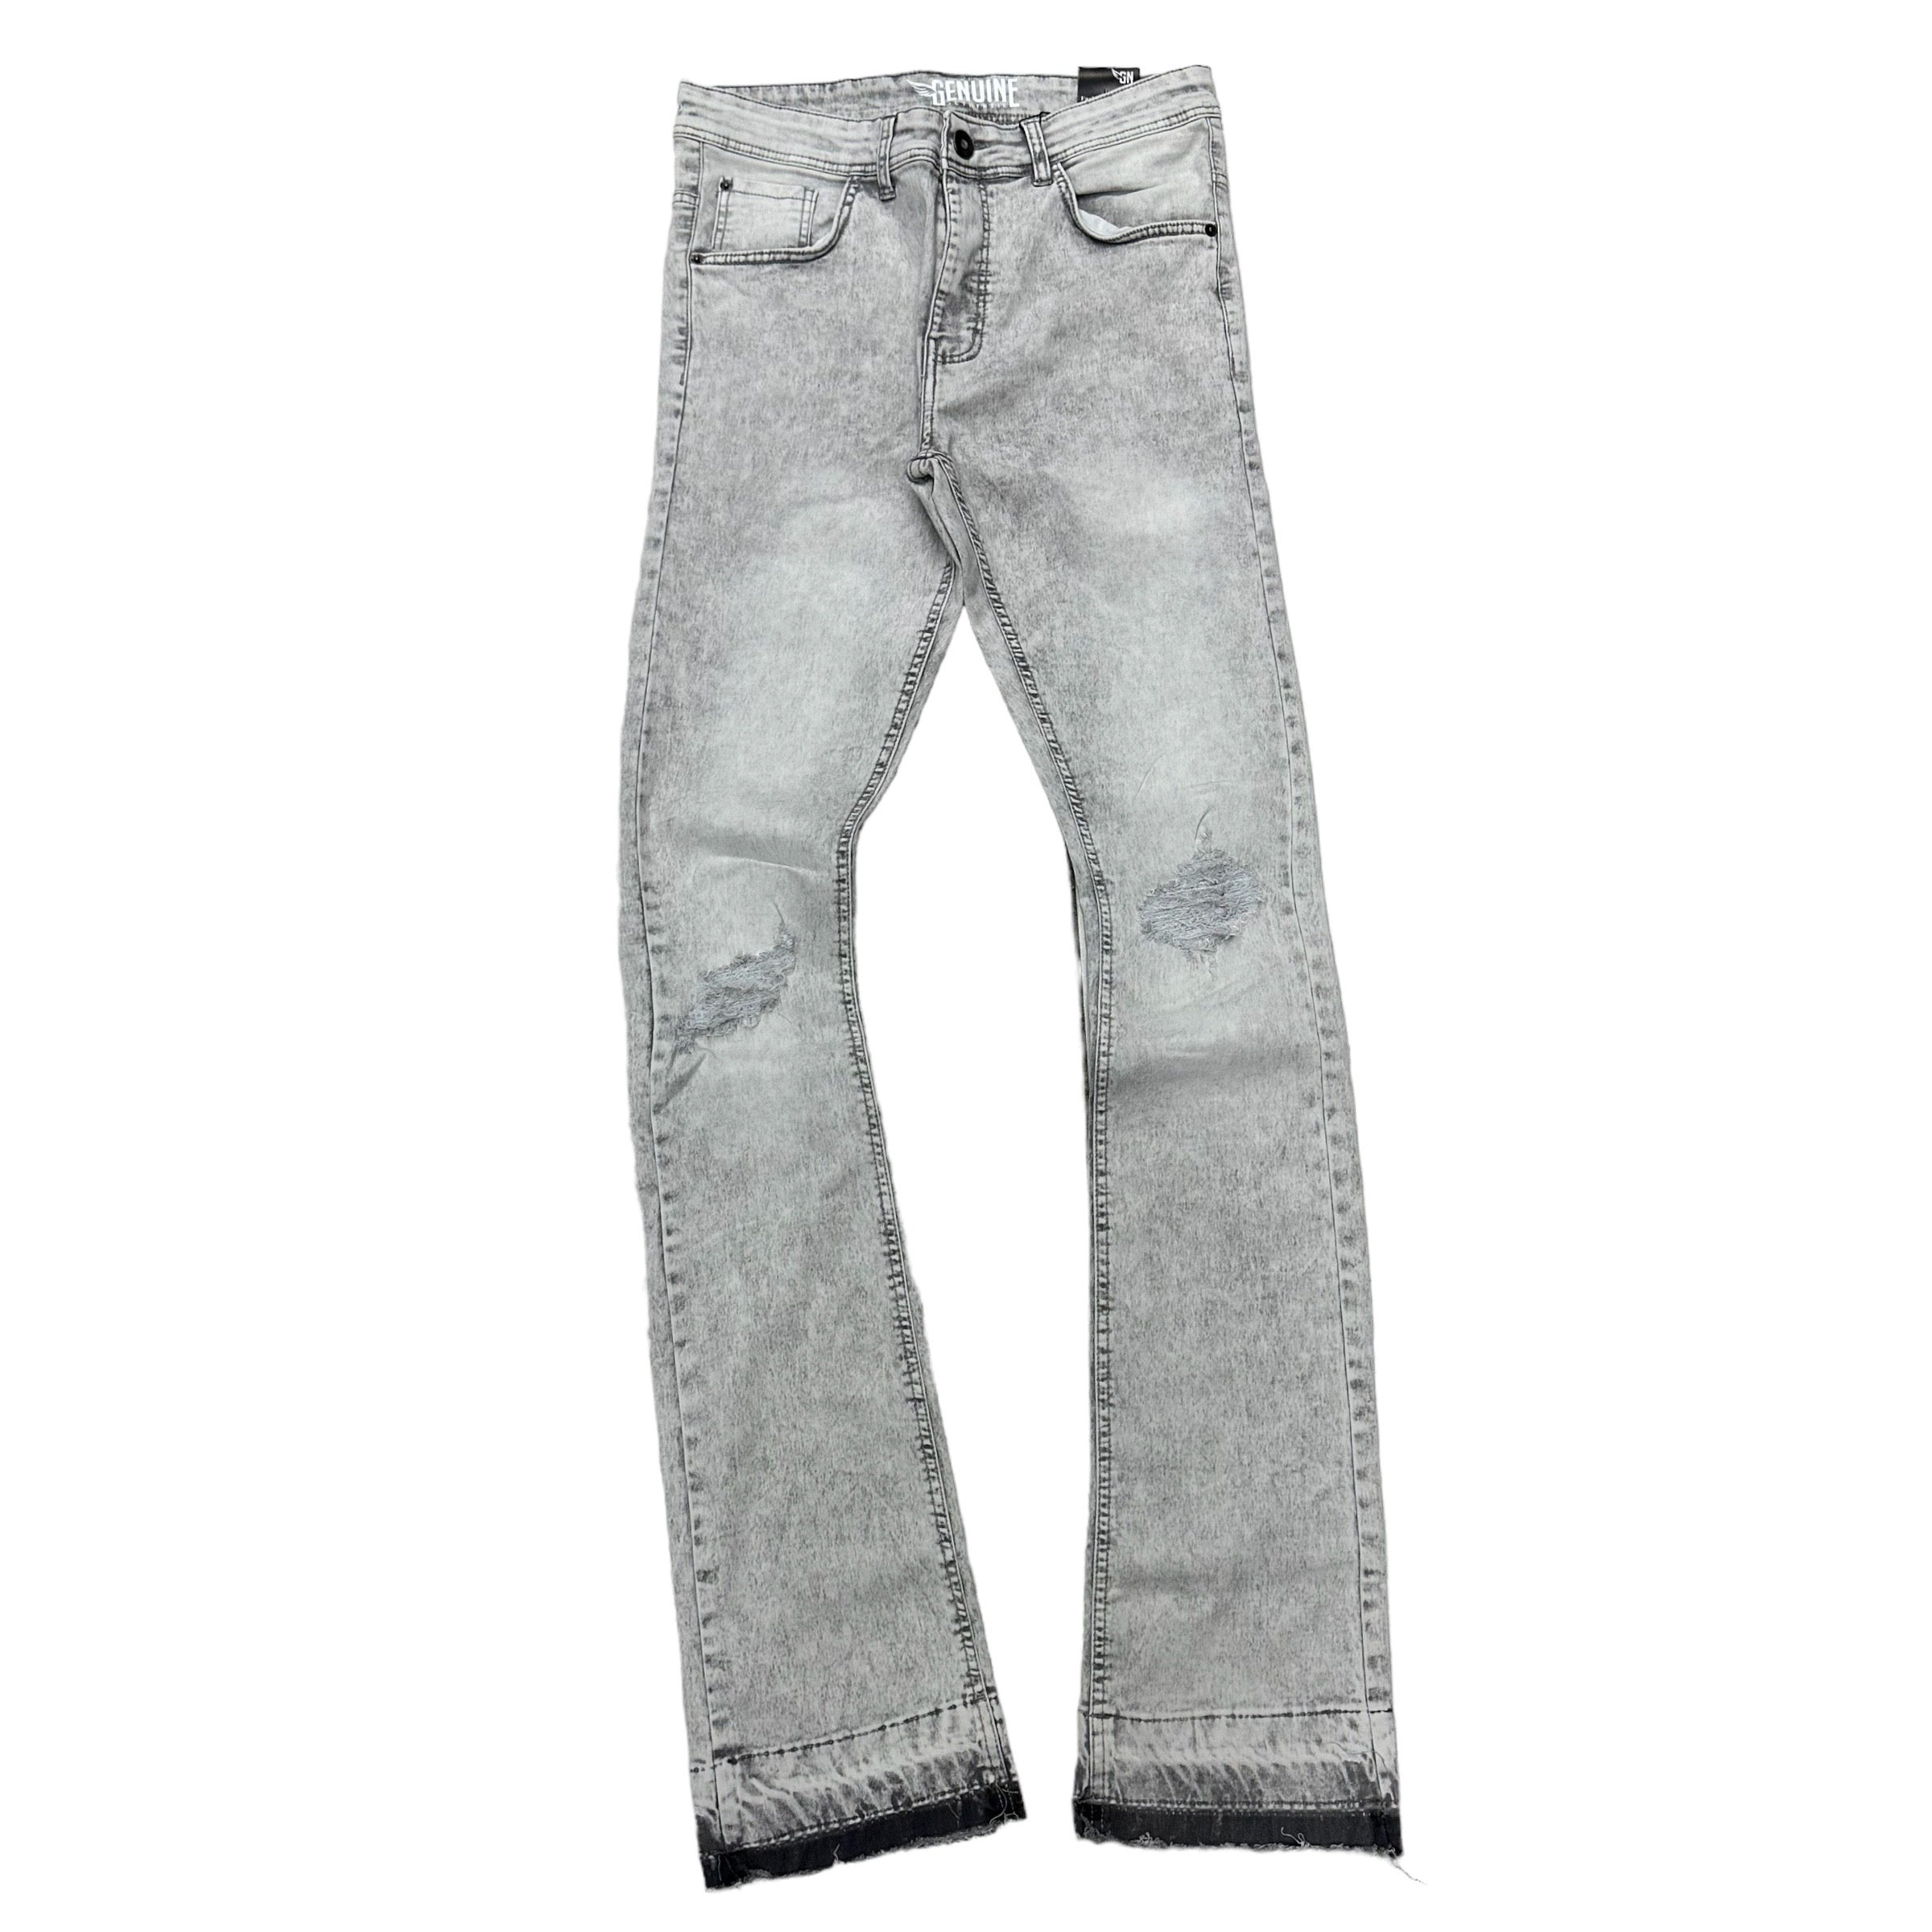 Narr Stacked Clean Rip Denim Grey 3211